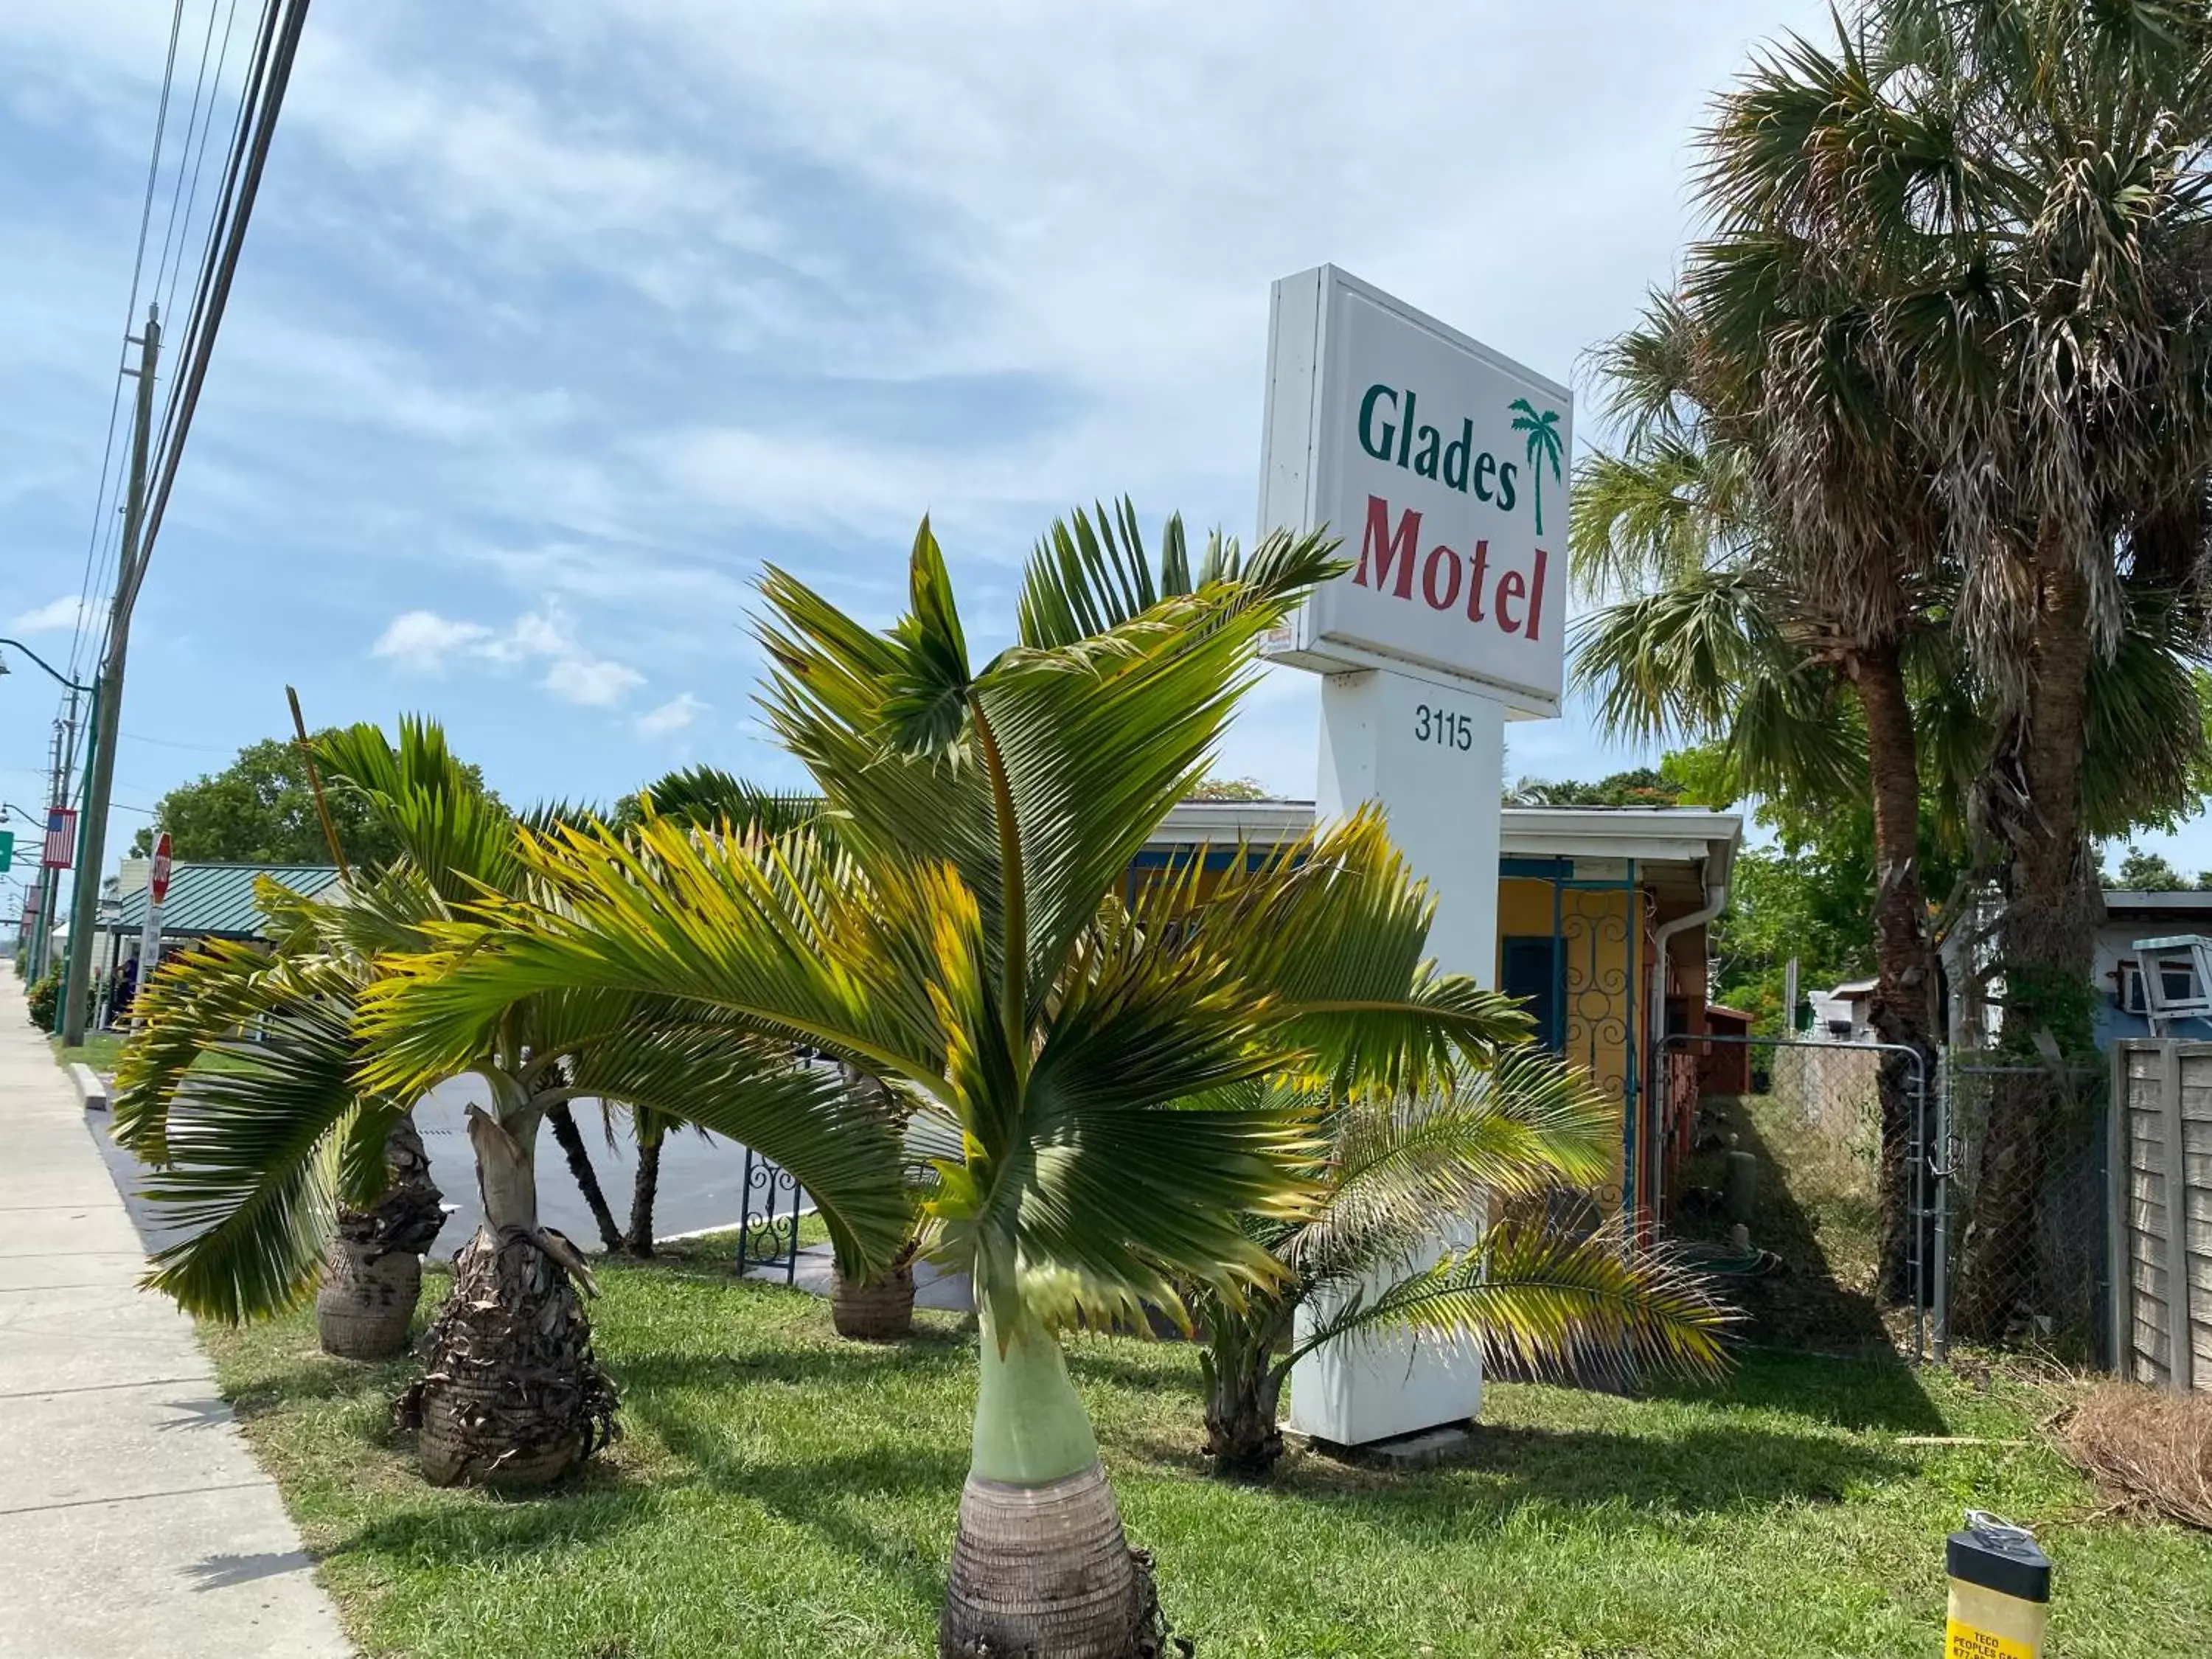 Property Building in Glades Motel - Naples